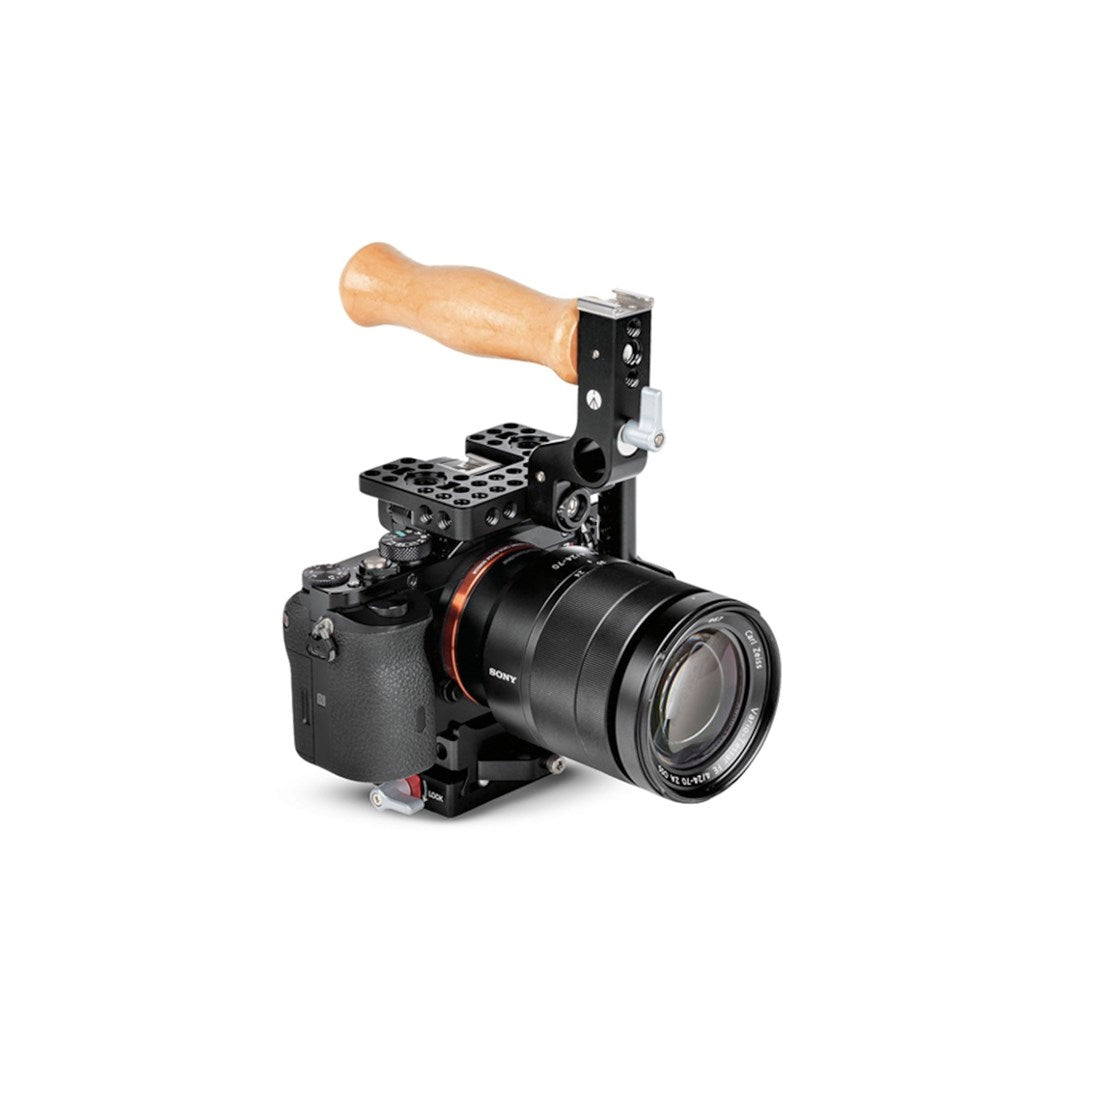 Product Image of Manfrotto Camera Cage for Small DSLR and Mirrorless Camera